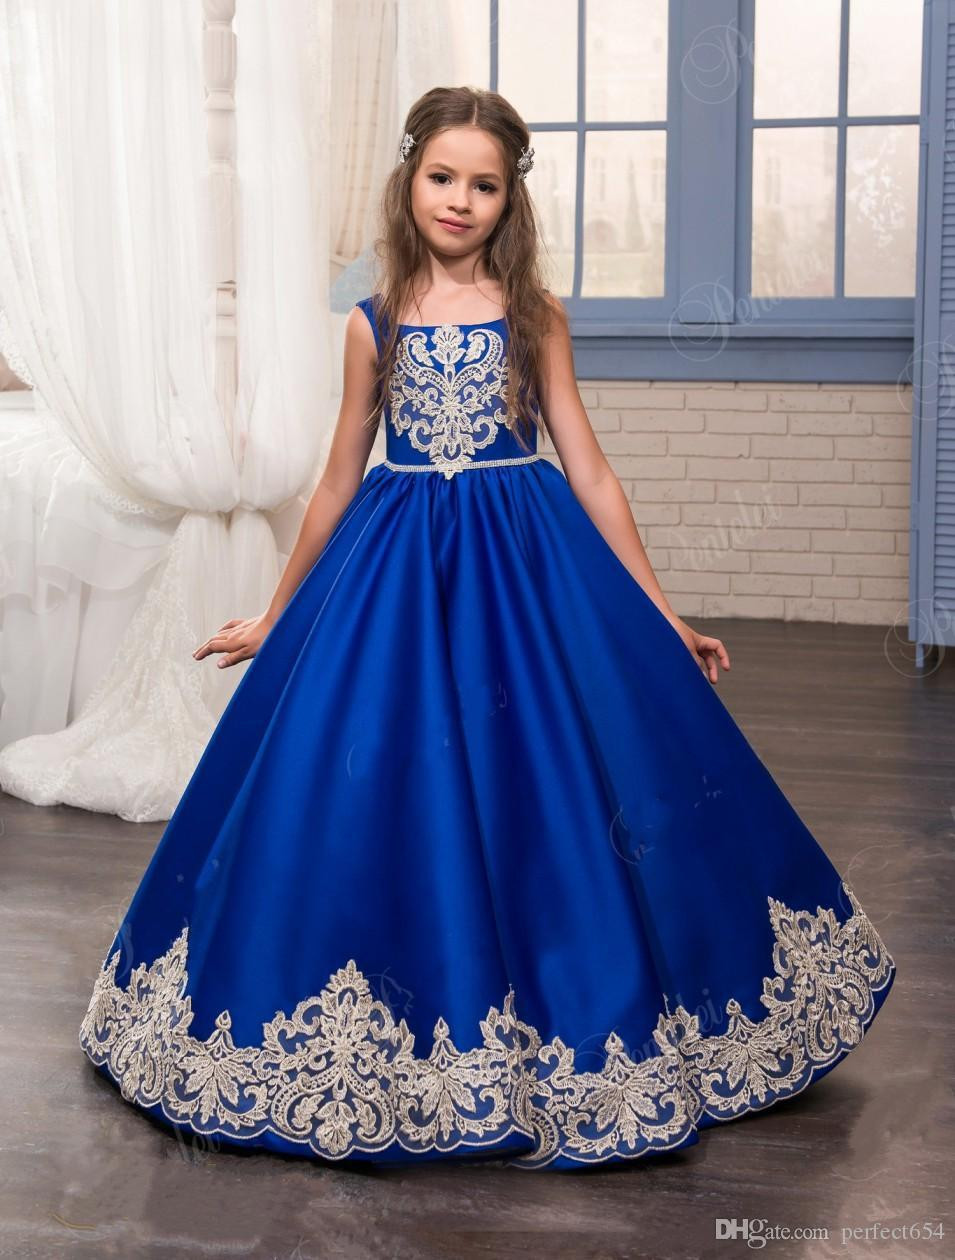 Party Dresses For Kids
 Kids Christmas Dresses For Party 2017 Royal Blue Girl